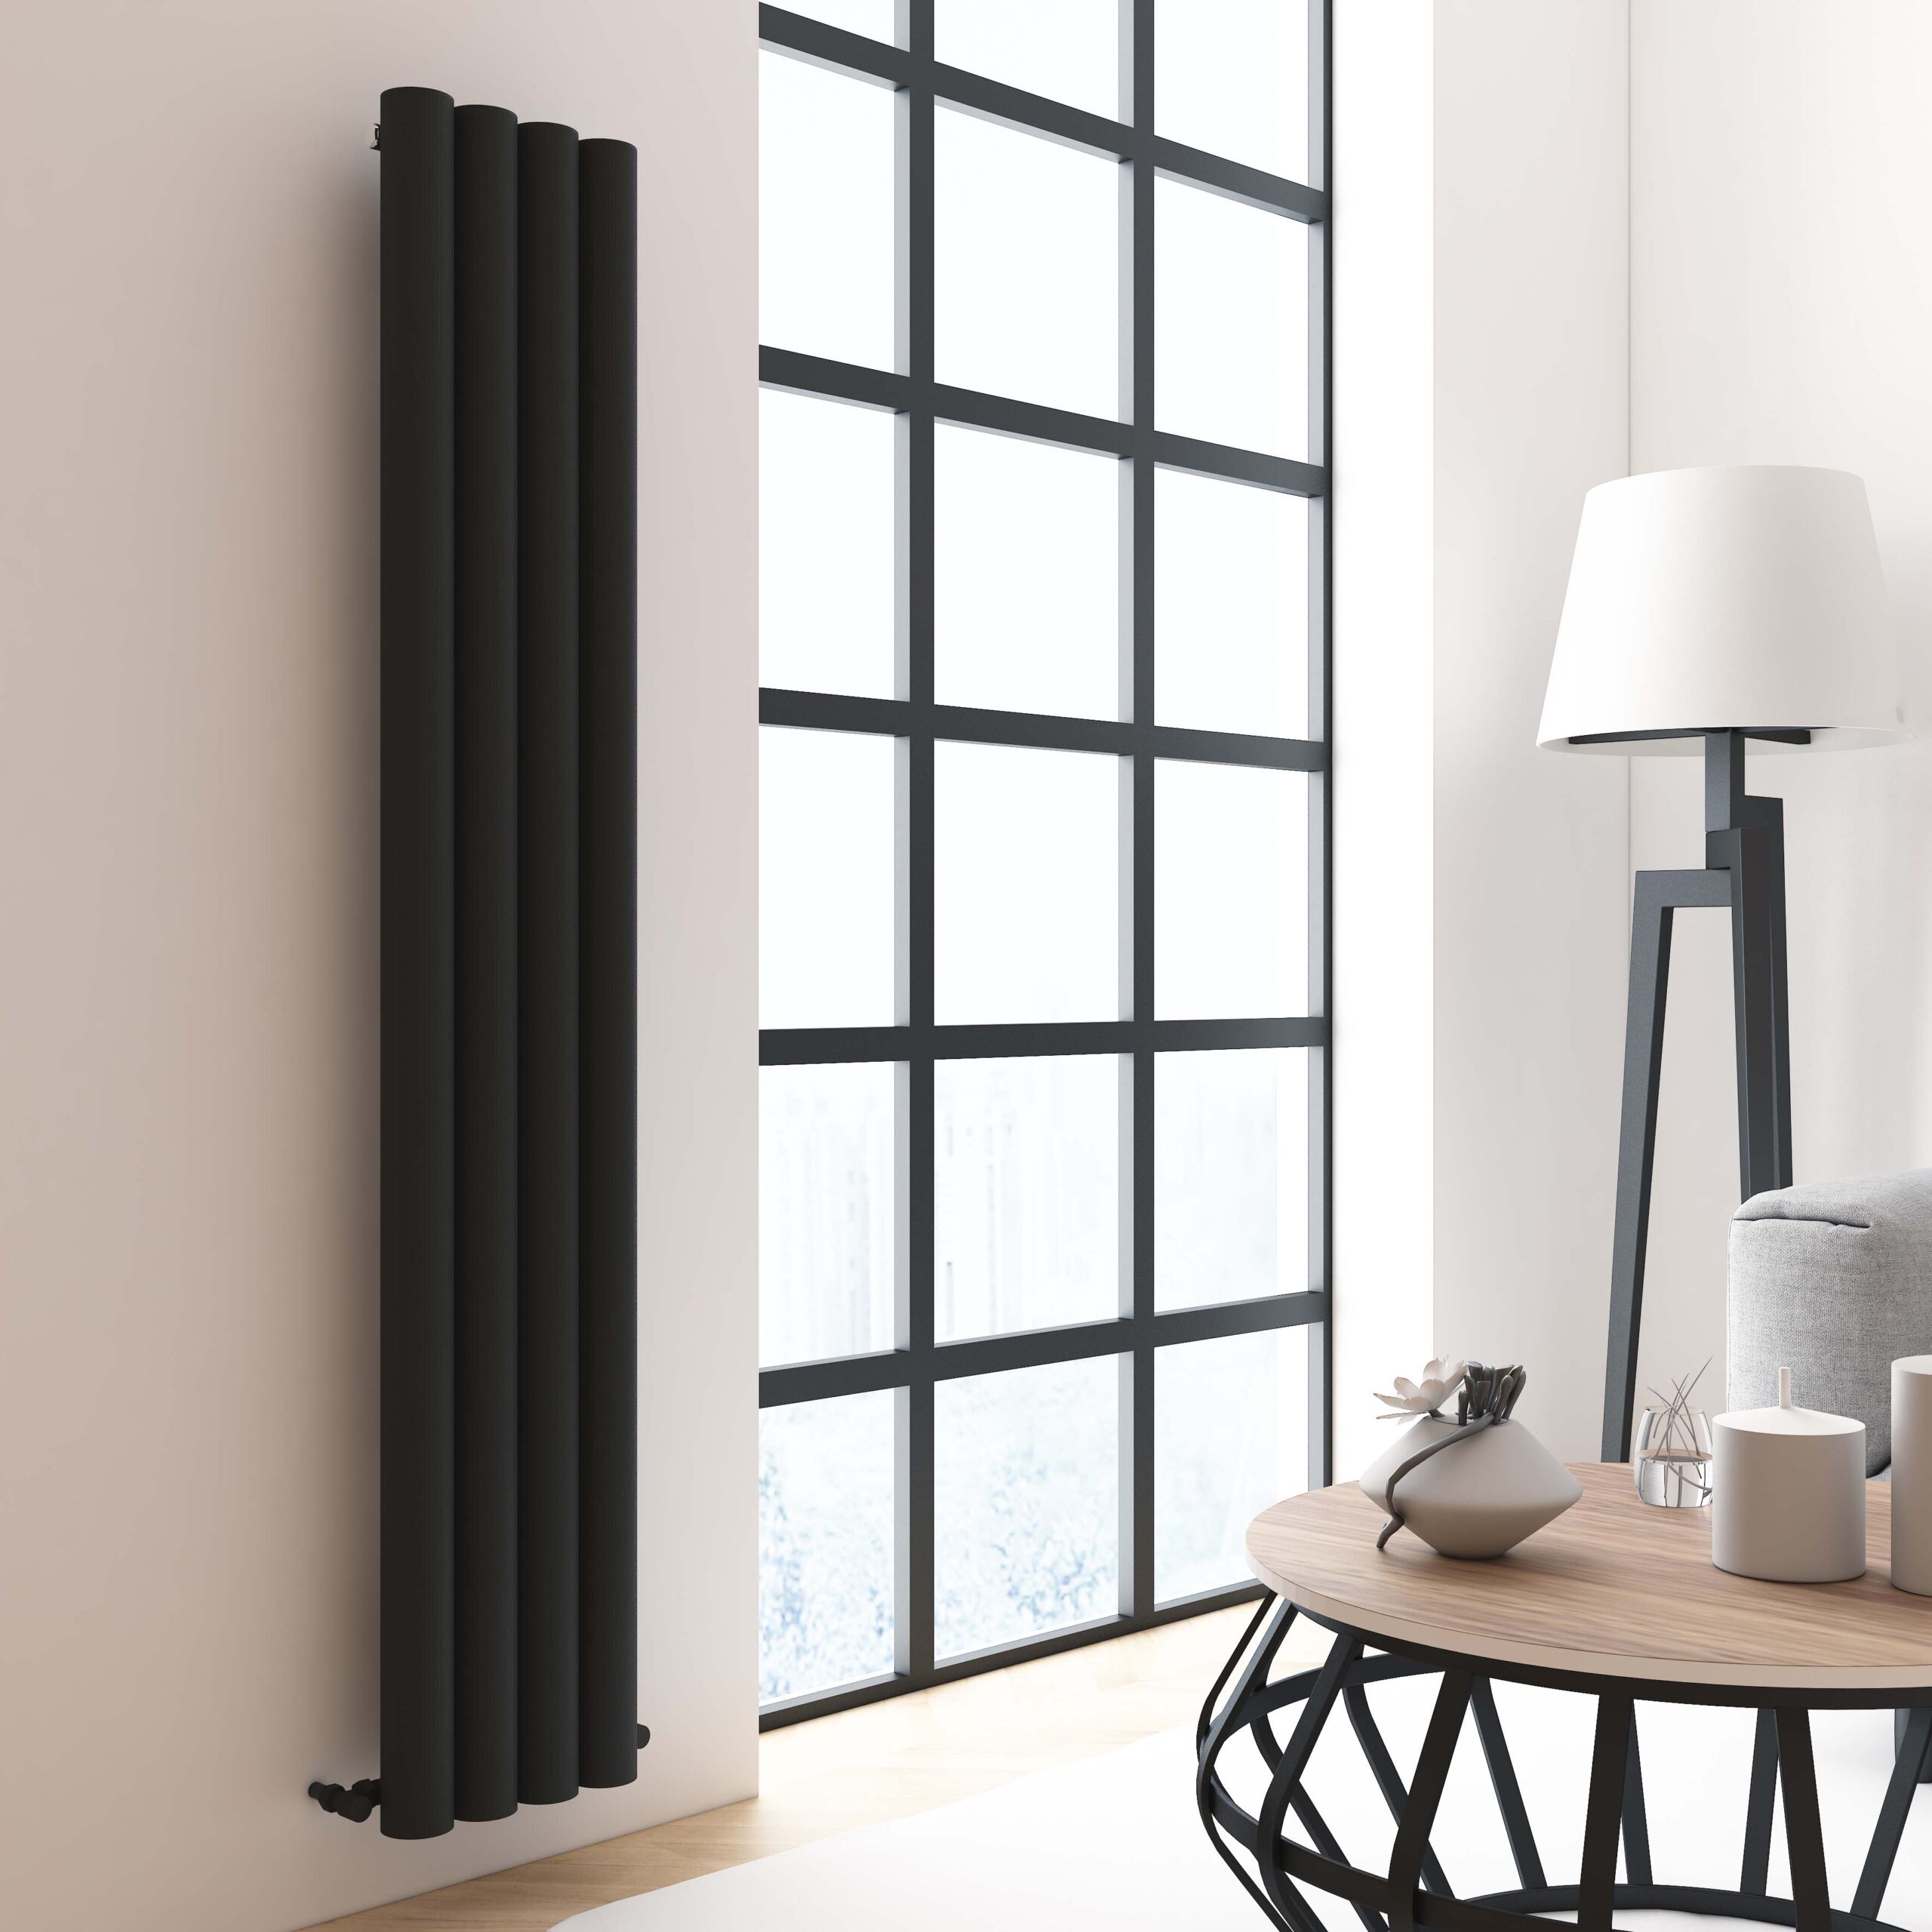 Close up product shot of the sleek powder coated frame and flat fronted design of OTTOs vertical radiator models that make an attractive non intrusive addition to interior walls